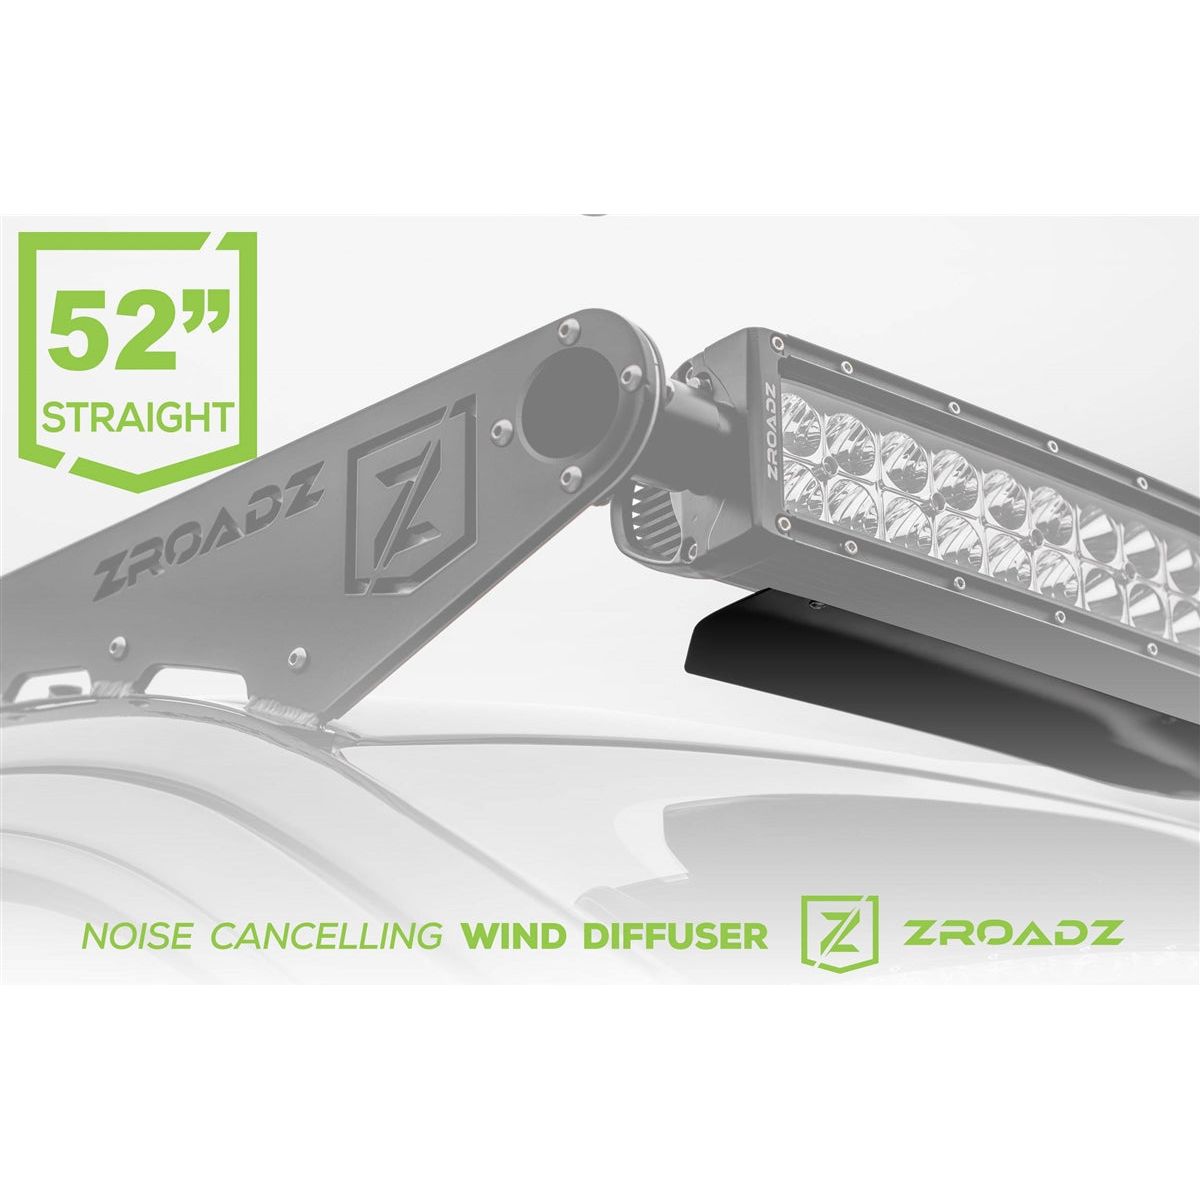 ZRoadZ Noise Cancelling Wind Diffuser for (1) 52 Inch Straight LED Light Bar